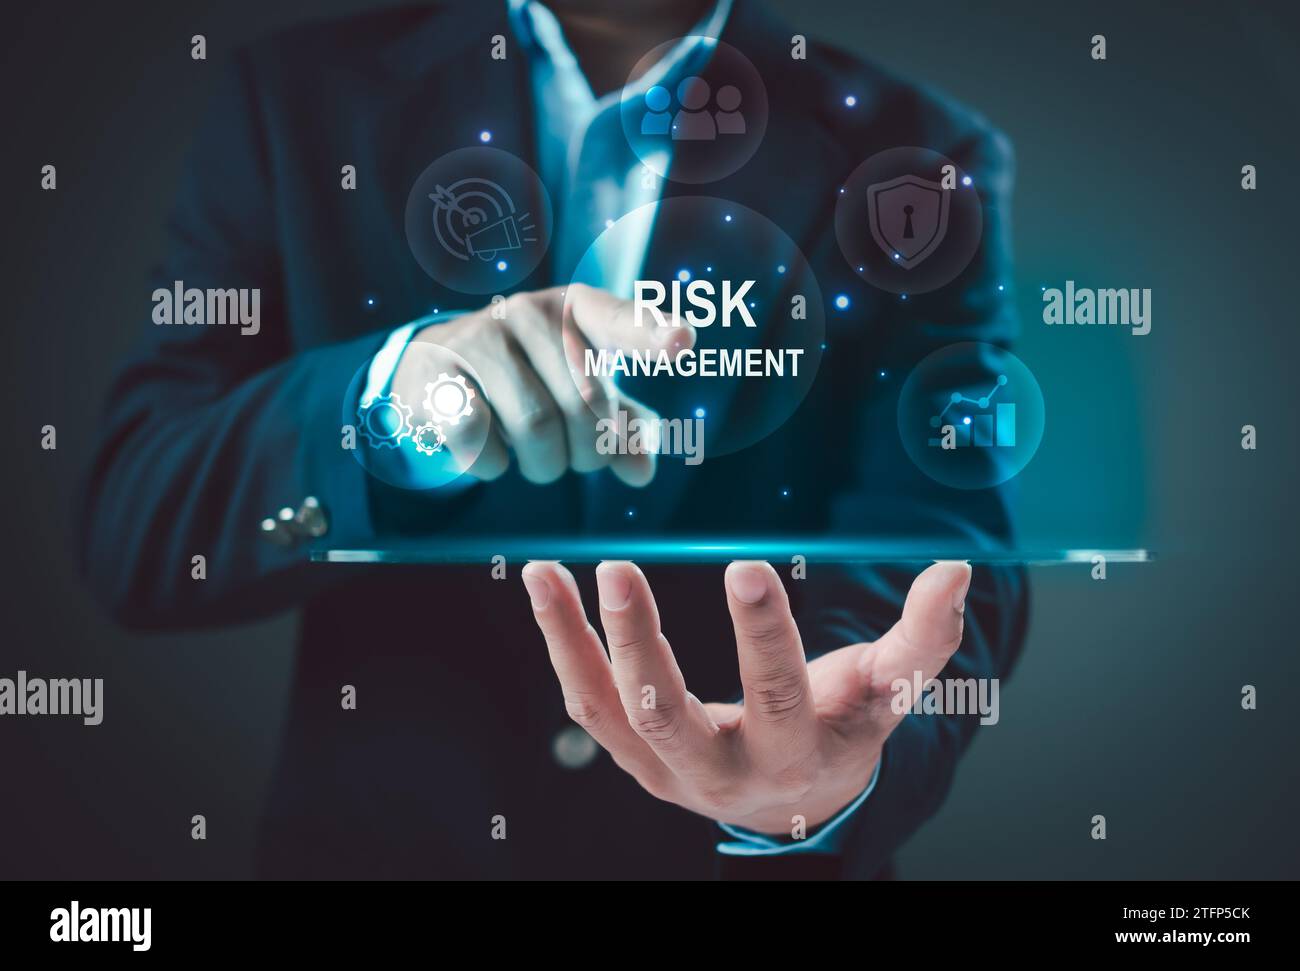 Risk management concept, Strategy and analyzing financial data on a virtual screen, Risk Management and Assessment for Business Investment Concept, Ri Stock Photo